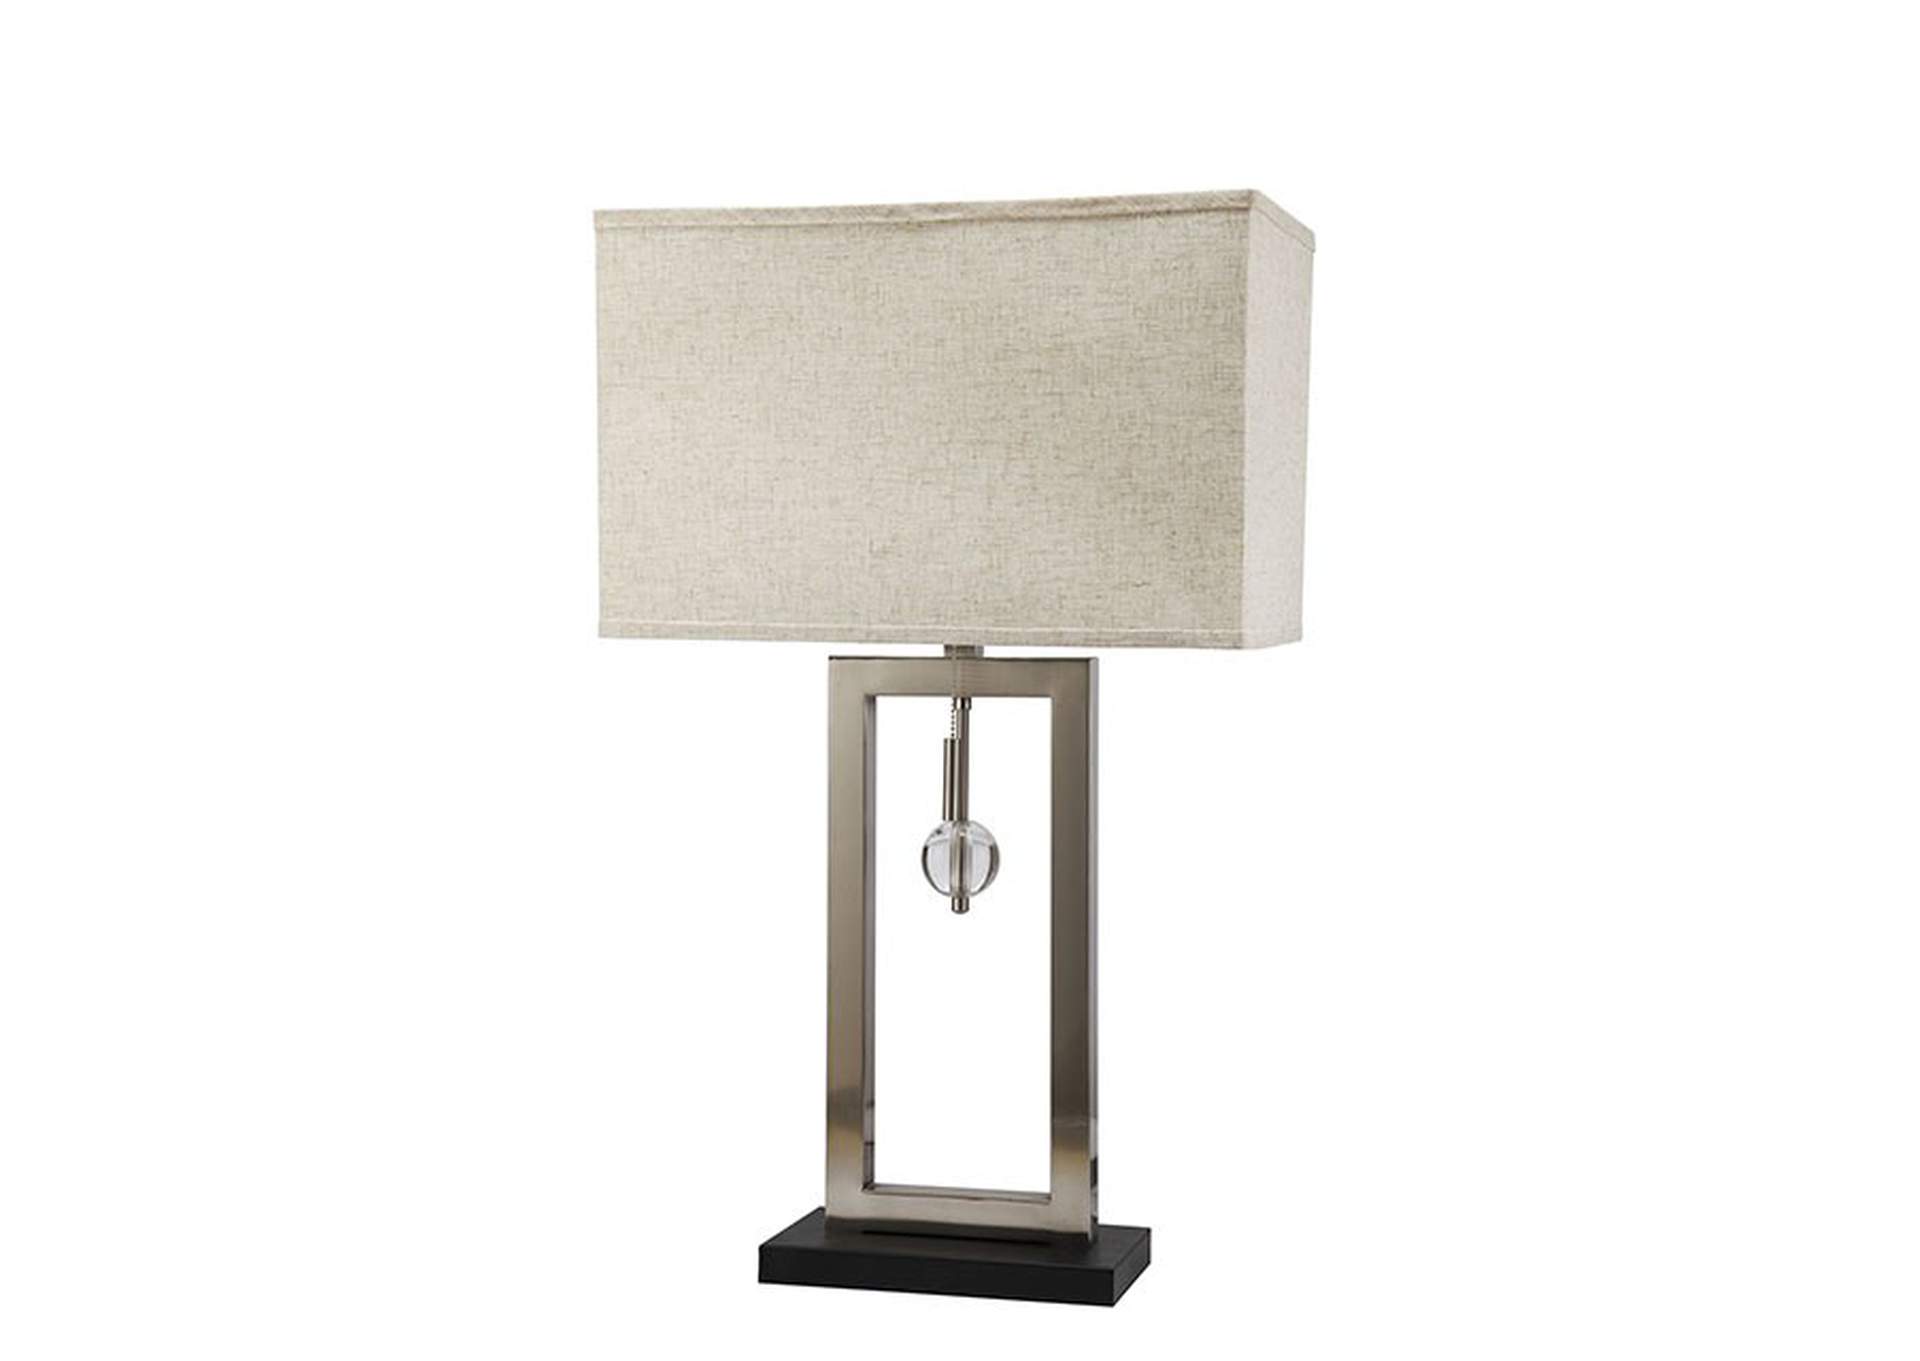 Terri Silver Table Lamp Affordable, Table Lamps Chicago Illinois